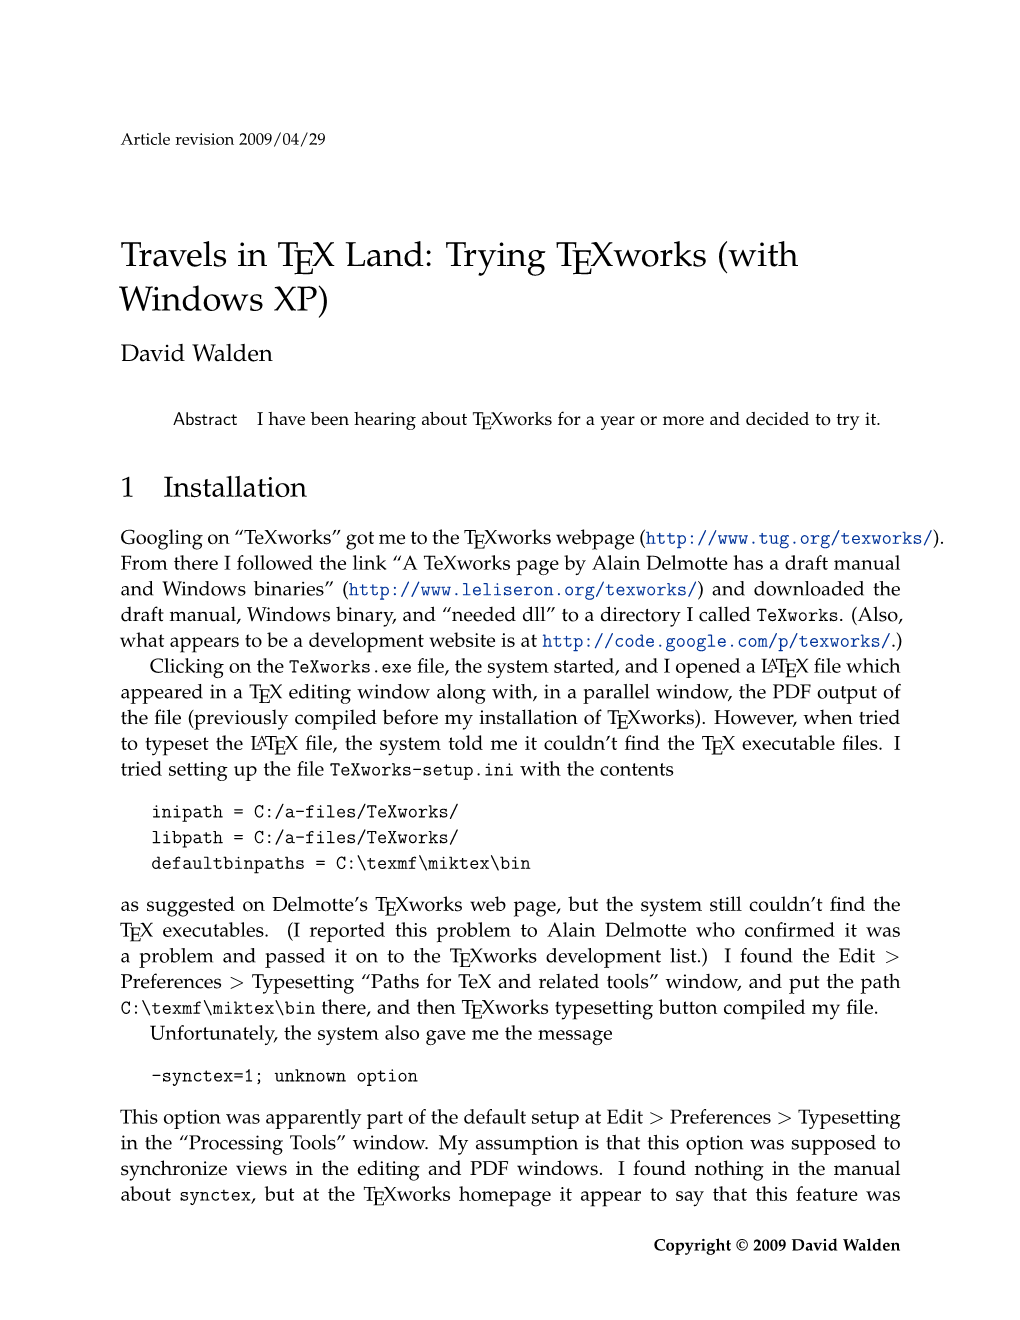 Travels in TEX Land: Trying Texworks (With Windows XP) David Walden